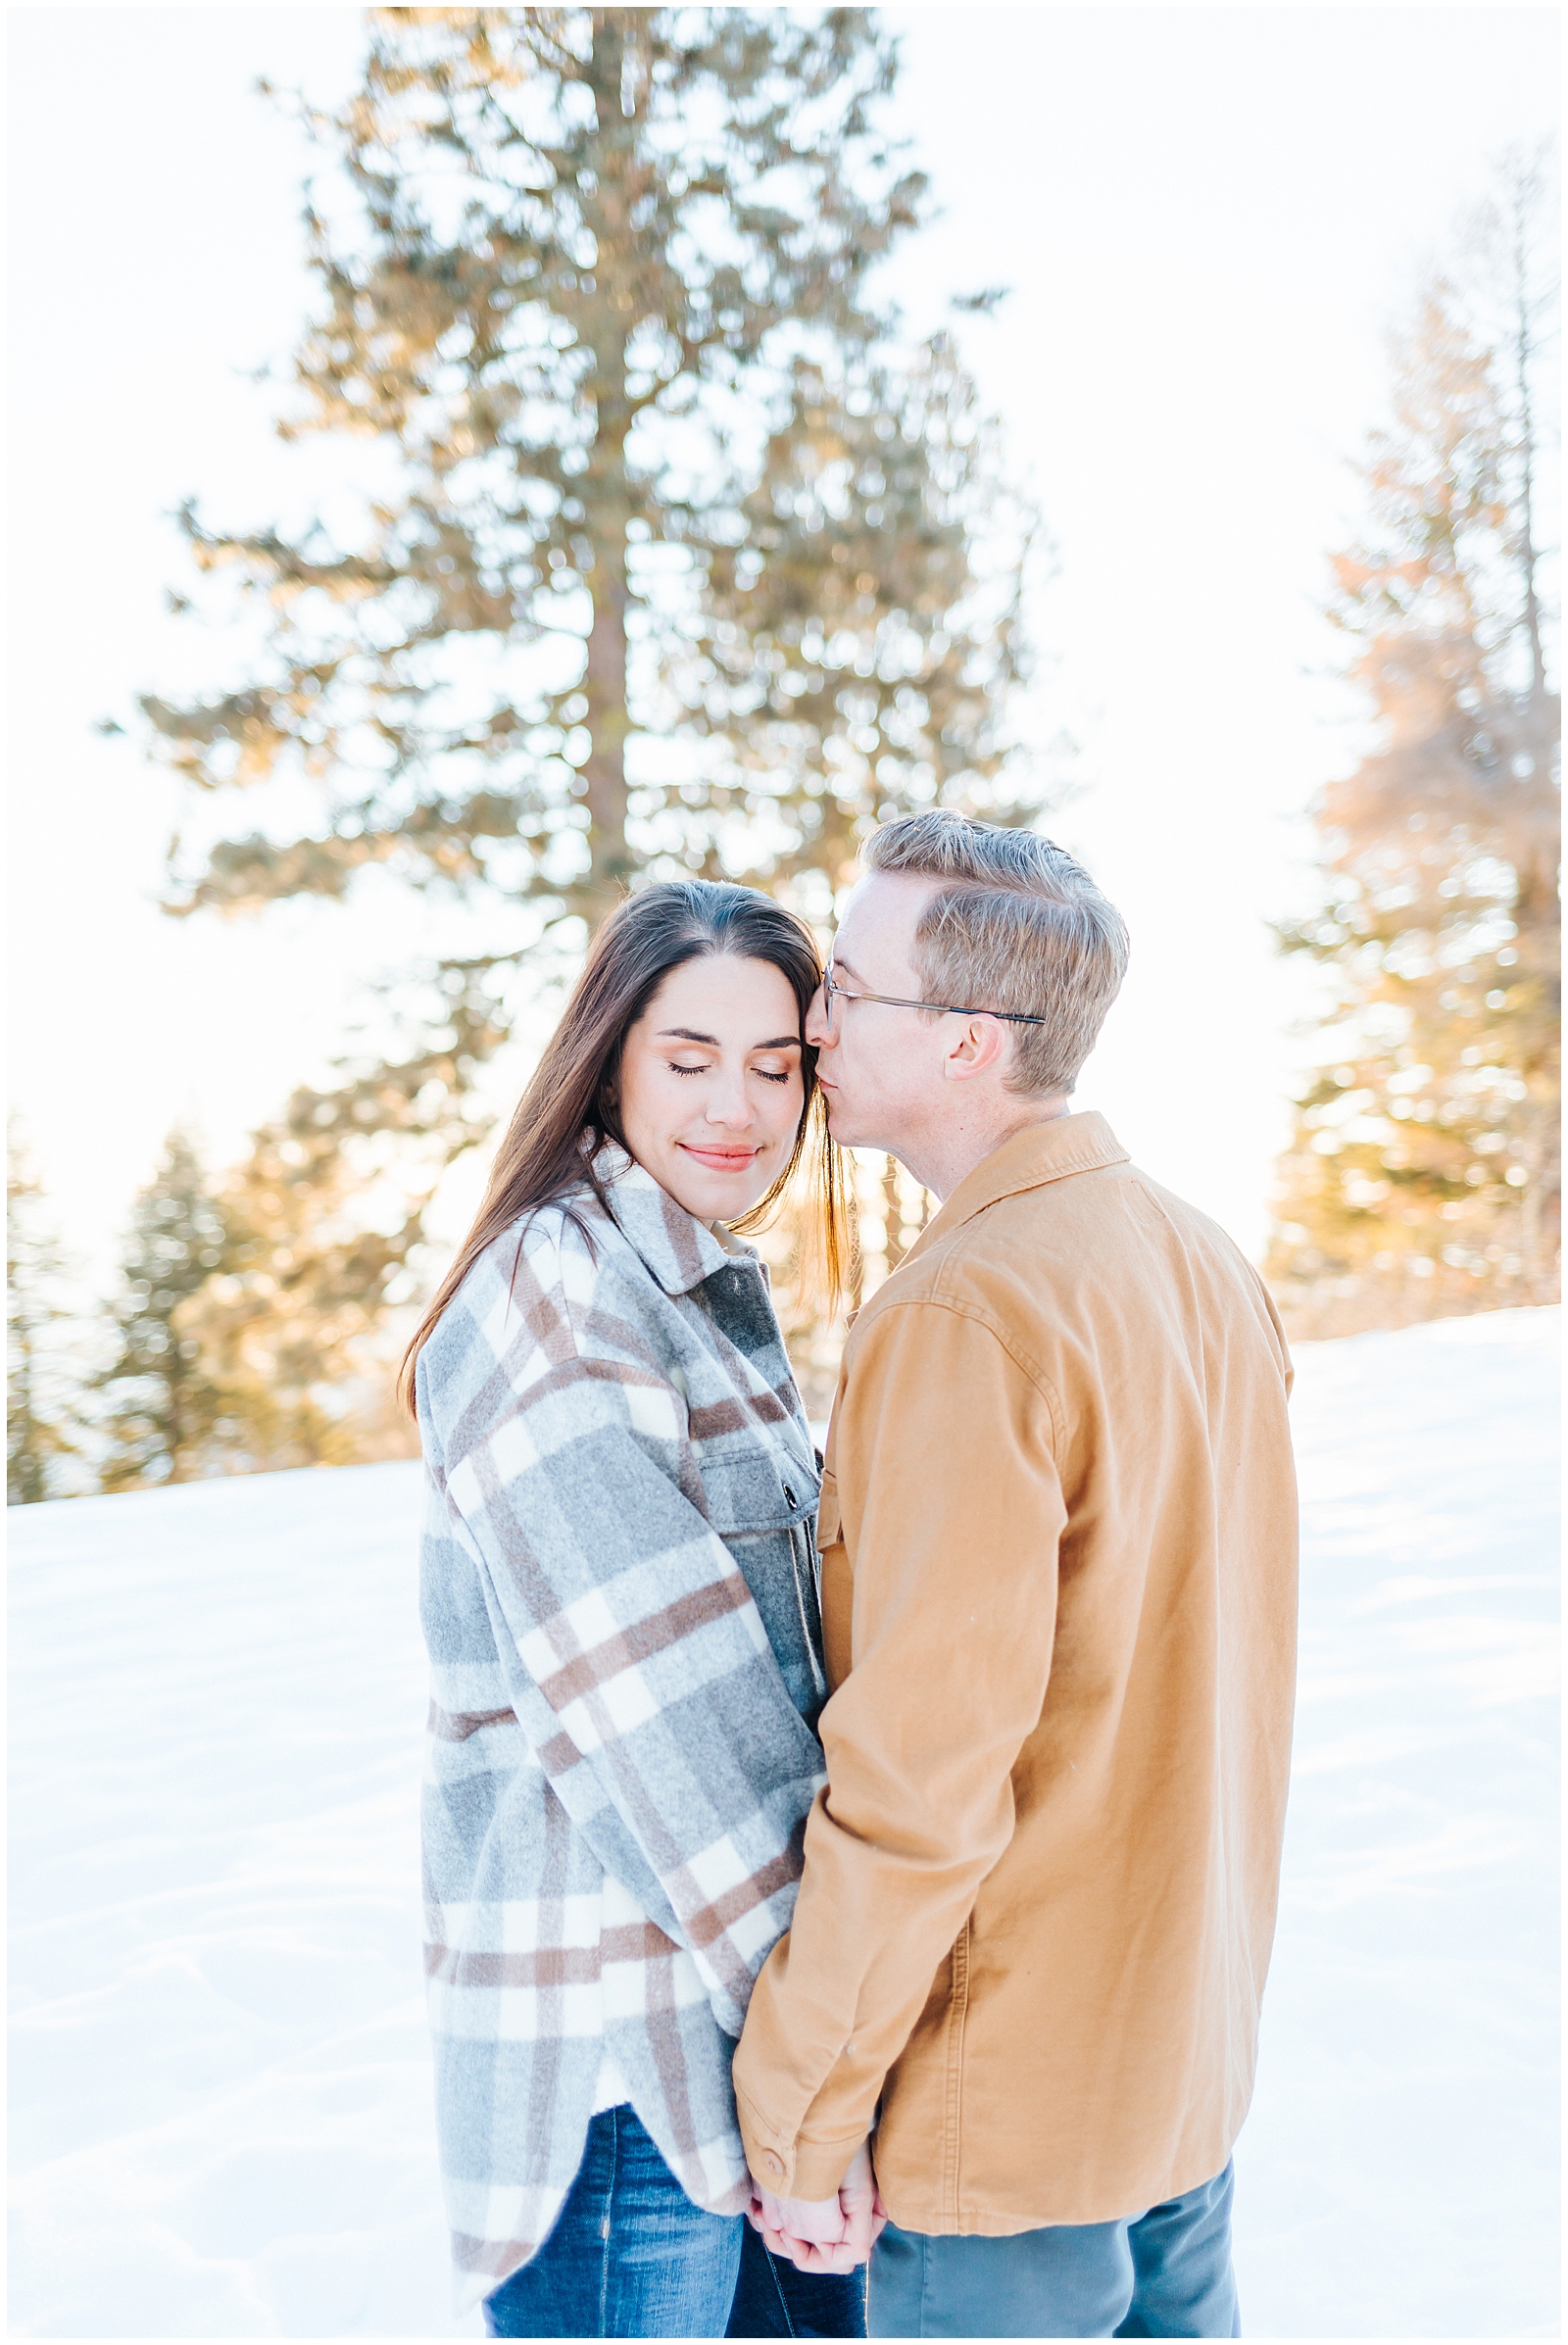 Winter Mountain Engagement Session in the Snow couple in flannels by Karli and David Photography 